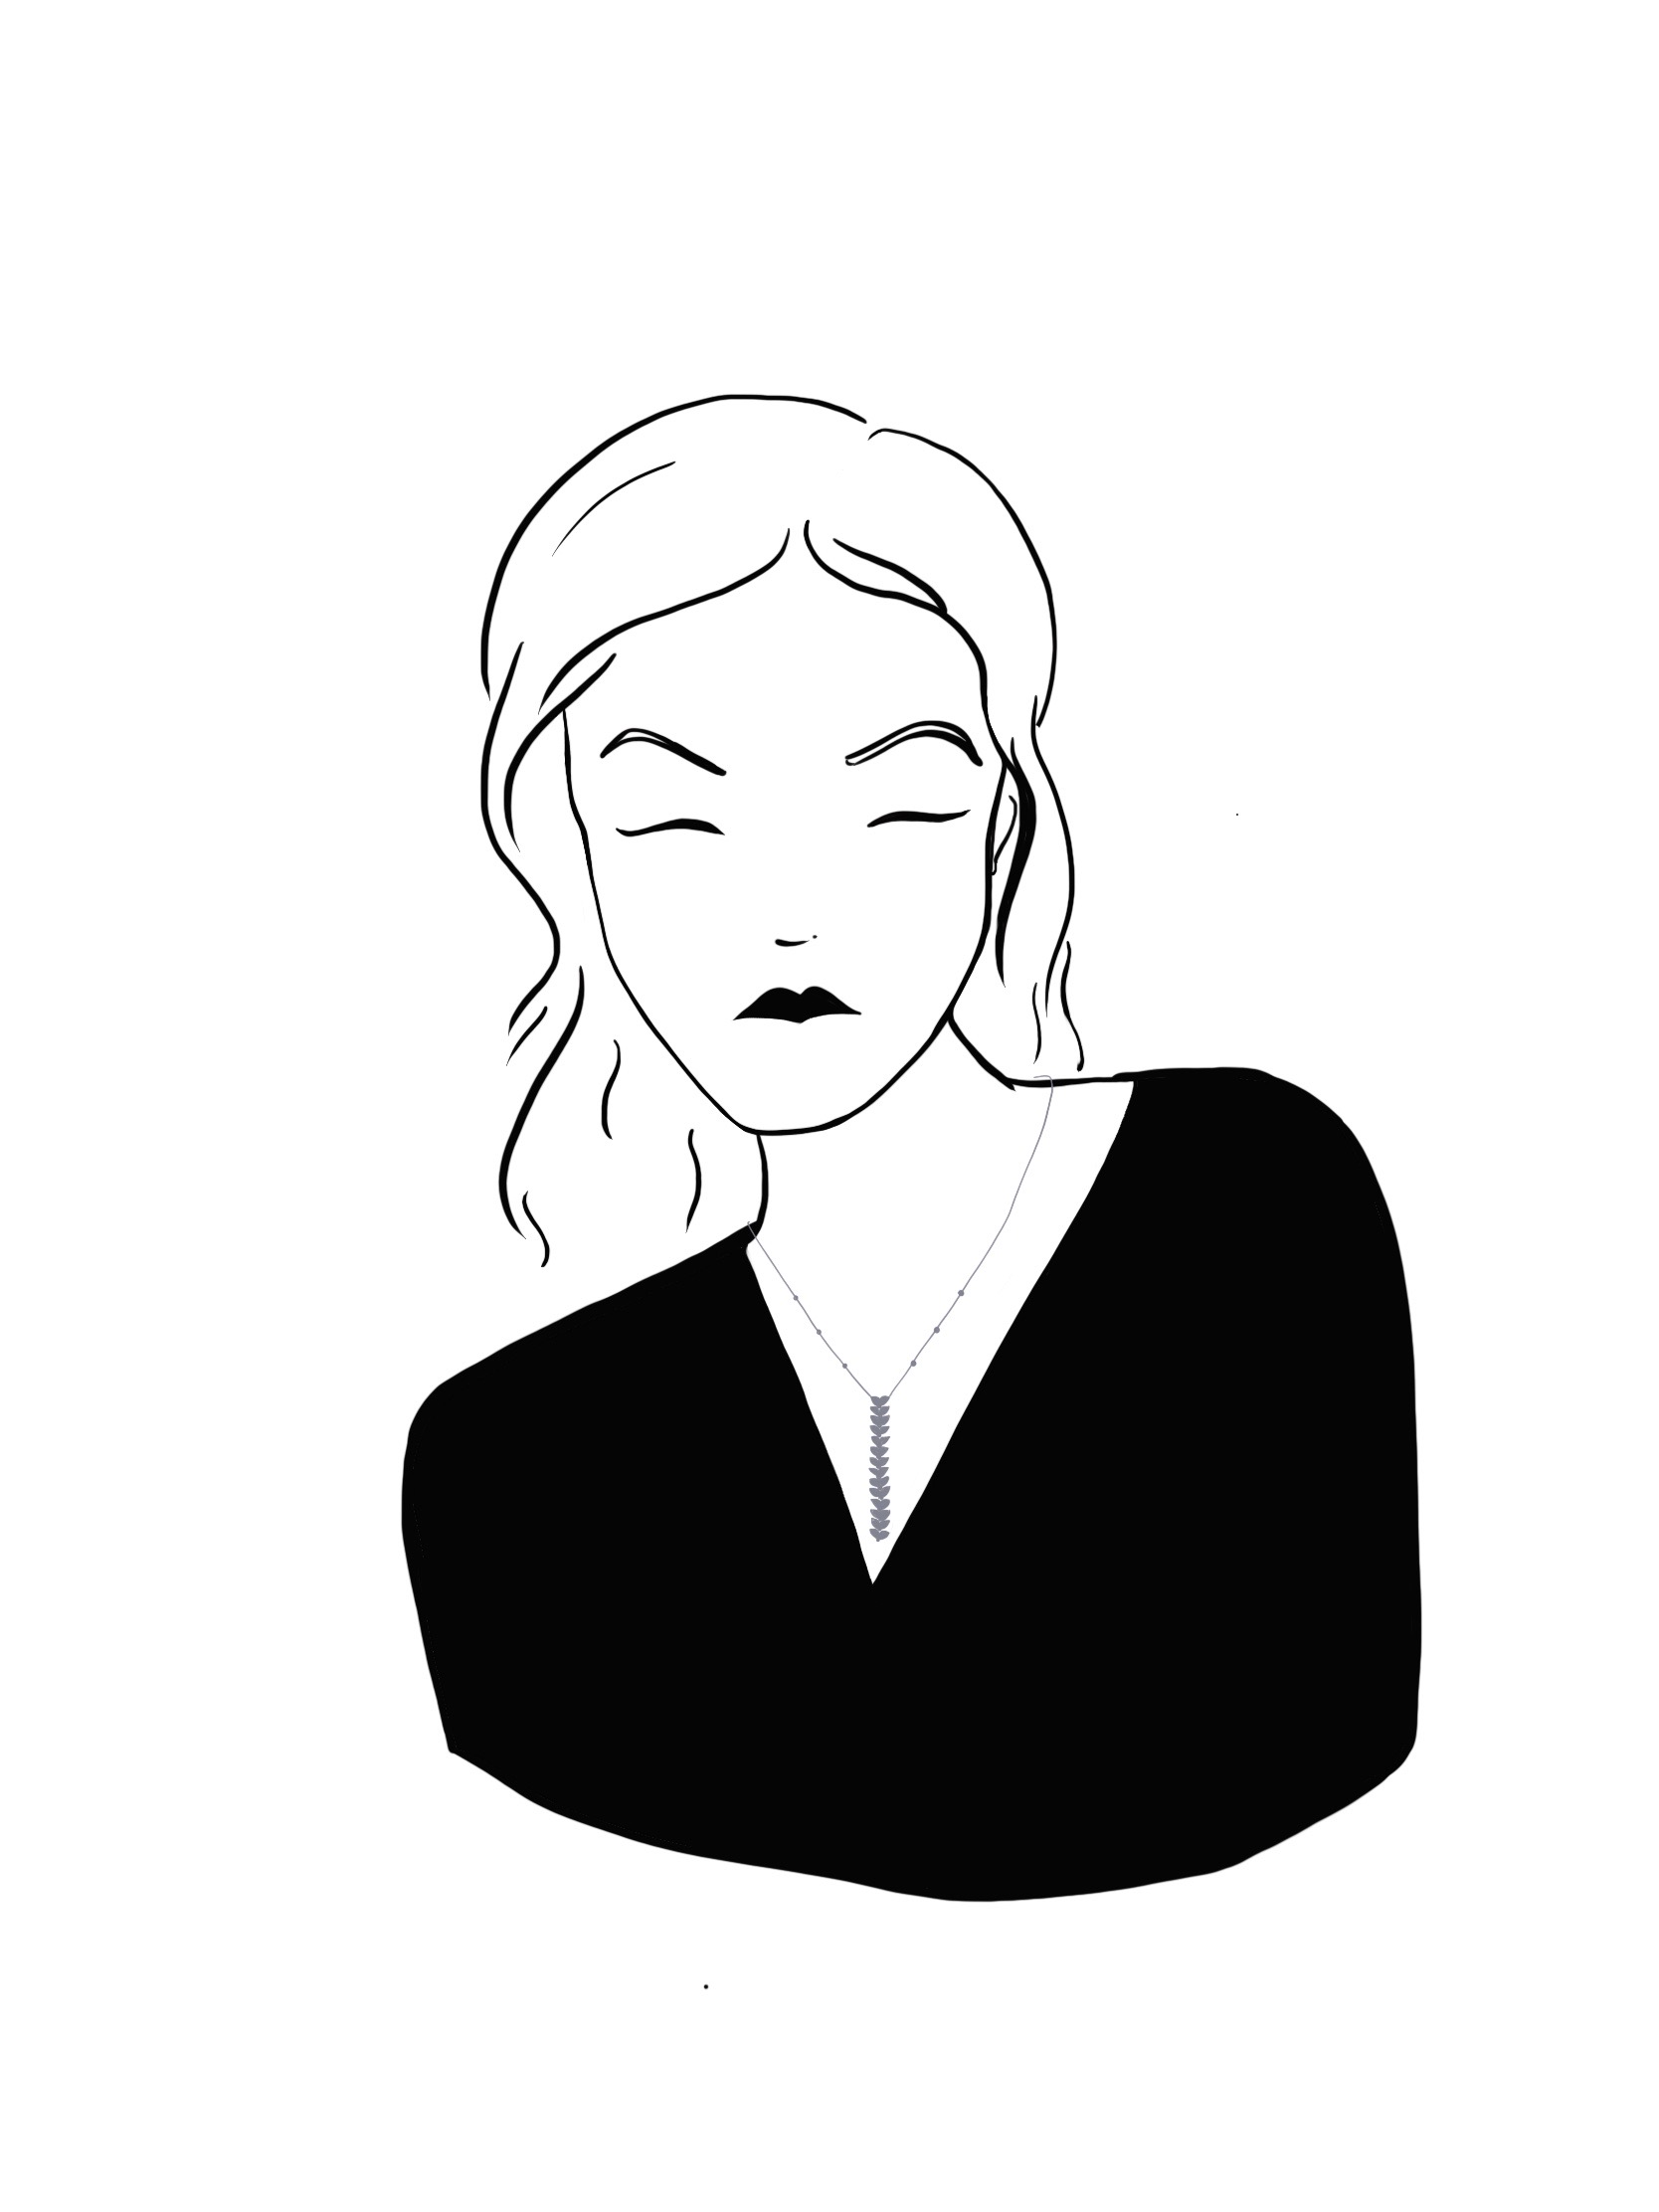 Line drawing illustration of a woman with short wavy hair and a black v-neck with a long pendant of inverted triangular shapes.